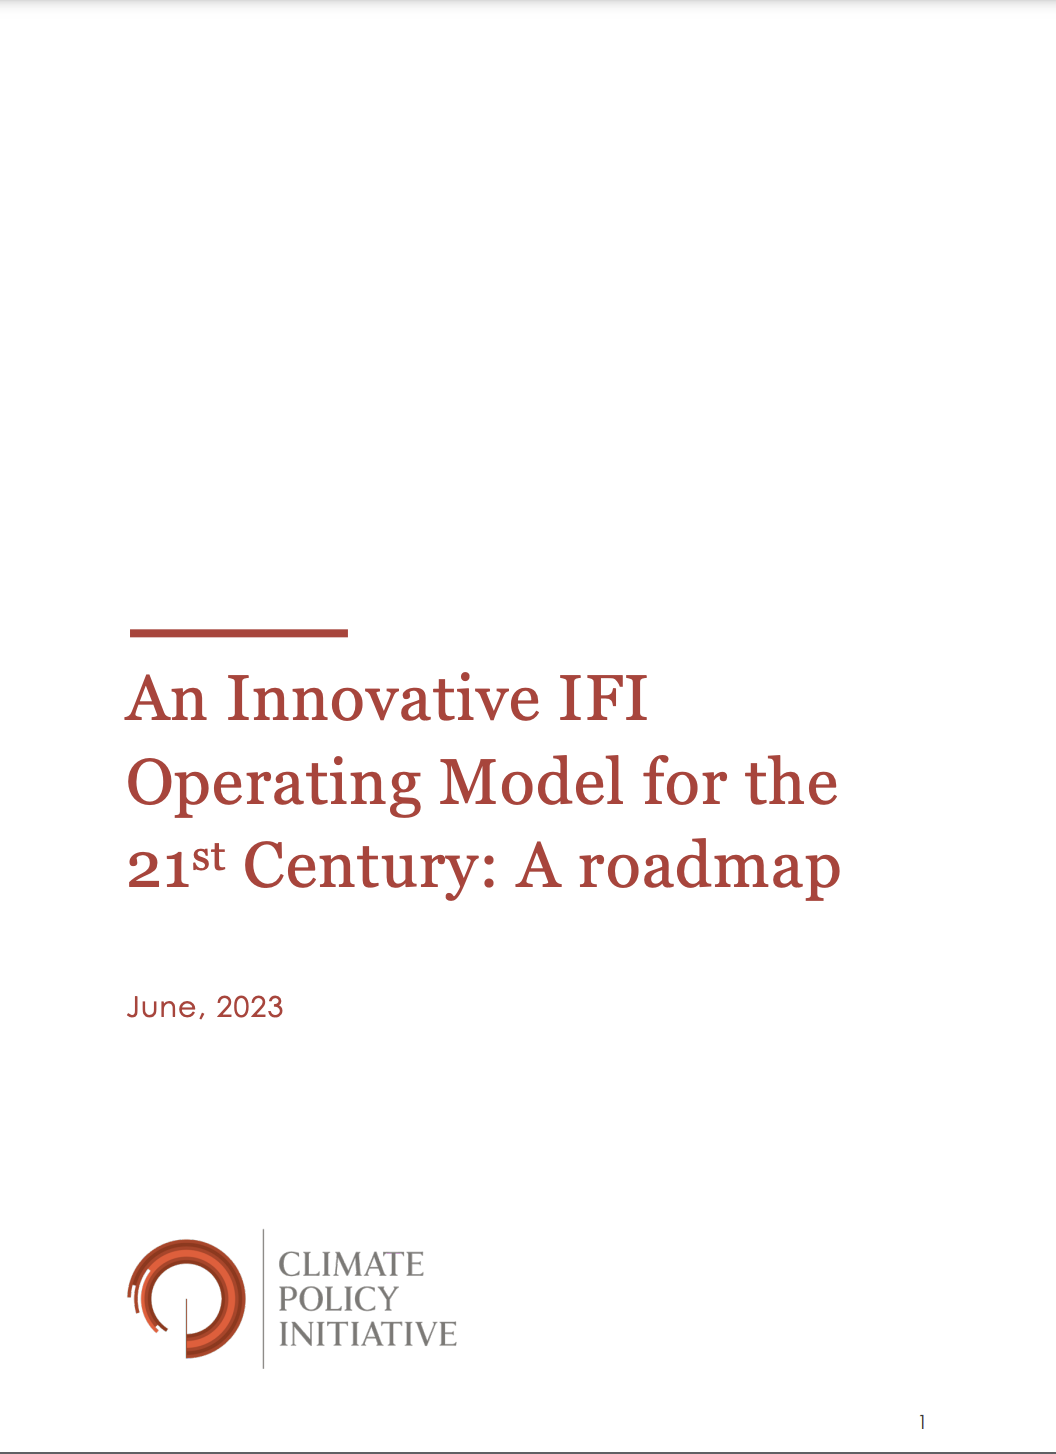 An Innovative IFI Operating Model for the 21st Century: A roadmap